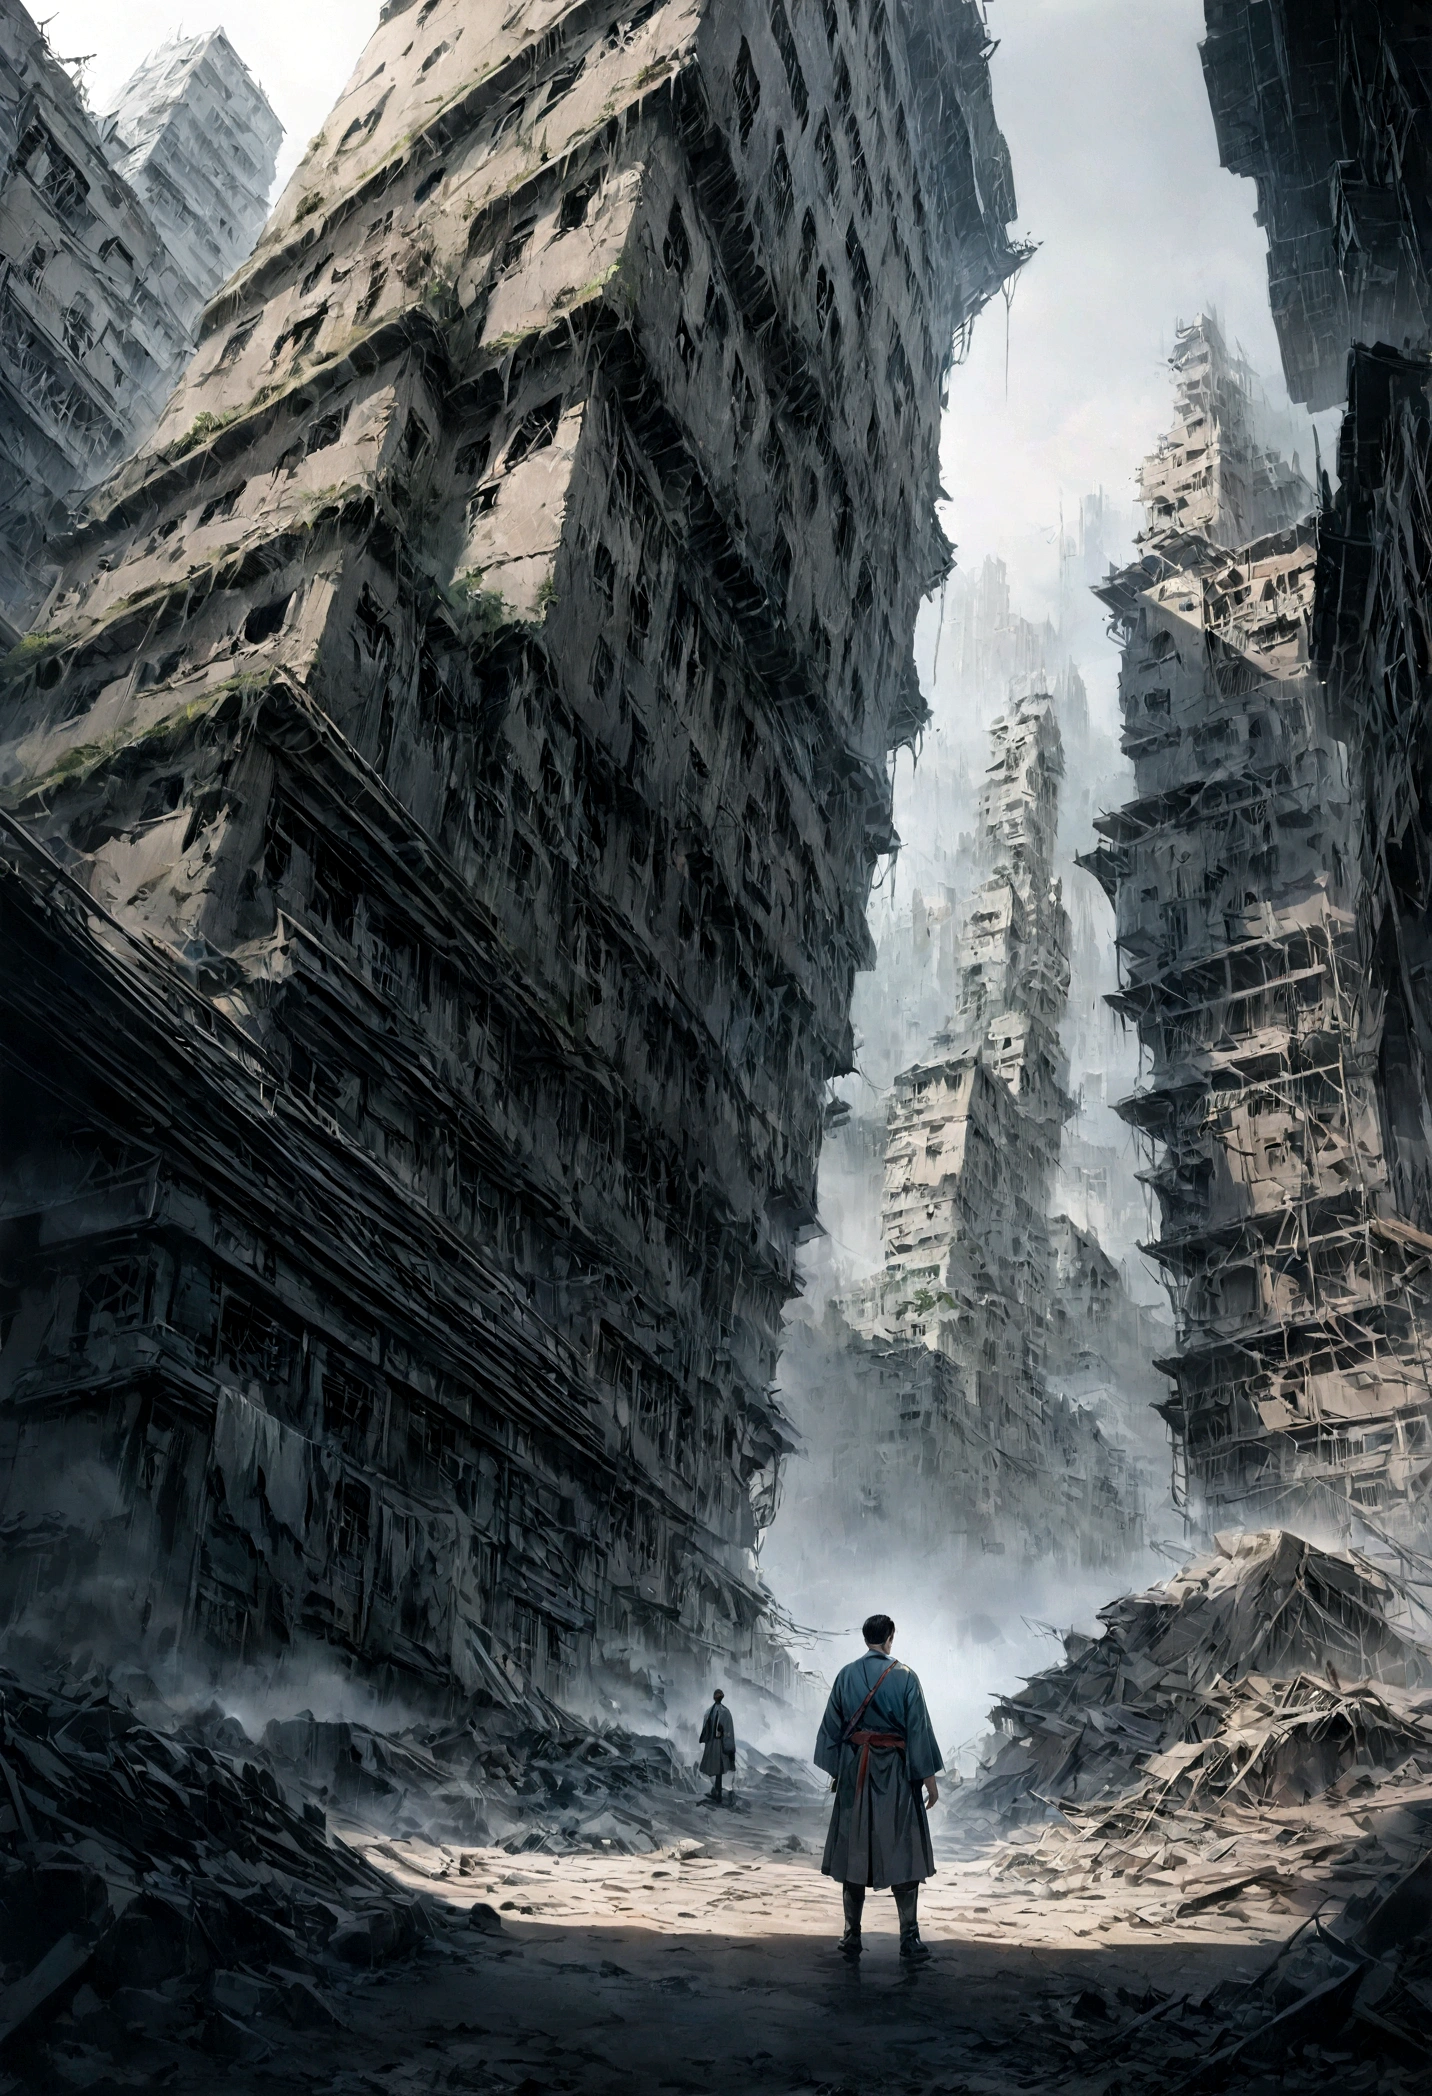 Boy in Japanese uniform、Calm expression、Crumbling cityscape、The rubble that appeared、Detailed line drawing、Very detailed、Intricate details、Calm colors、Dramatic Cinematic Lighting、Dystopia、Concept Art、Digital Painting、8K、High resolution、Photorealistic